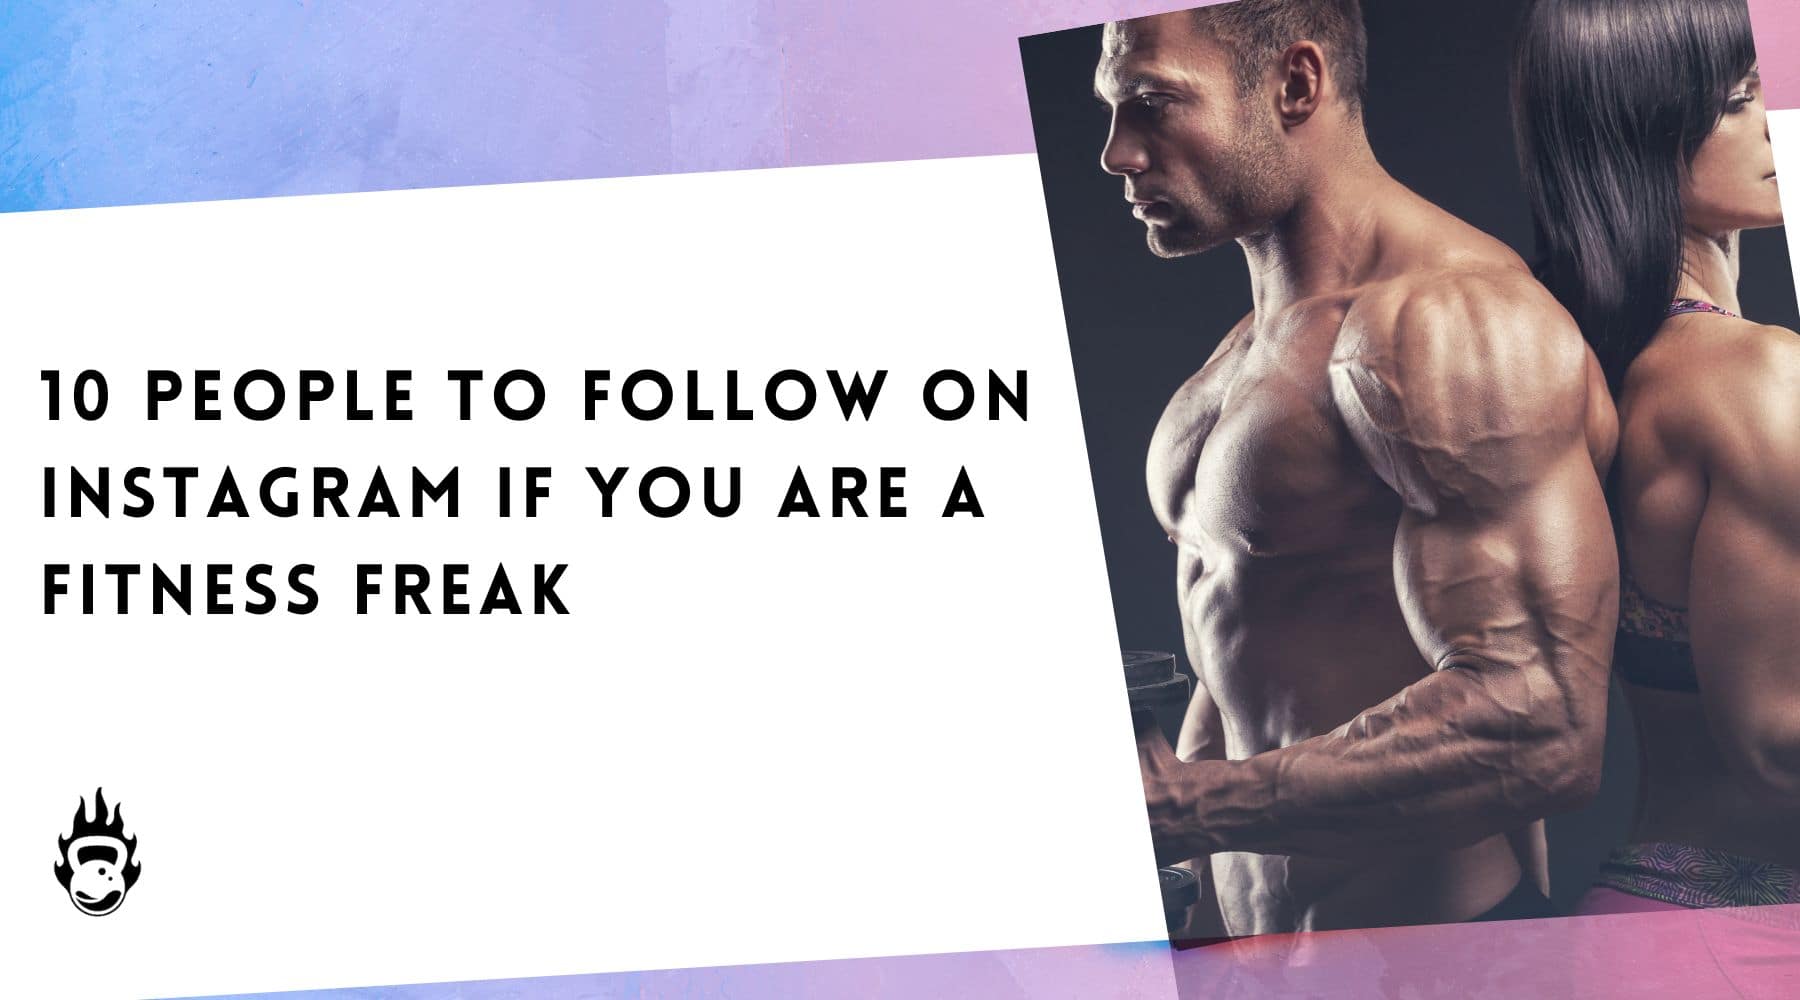 10 People To Follow On Instagram If You Are A Fitness Freak